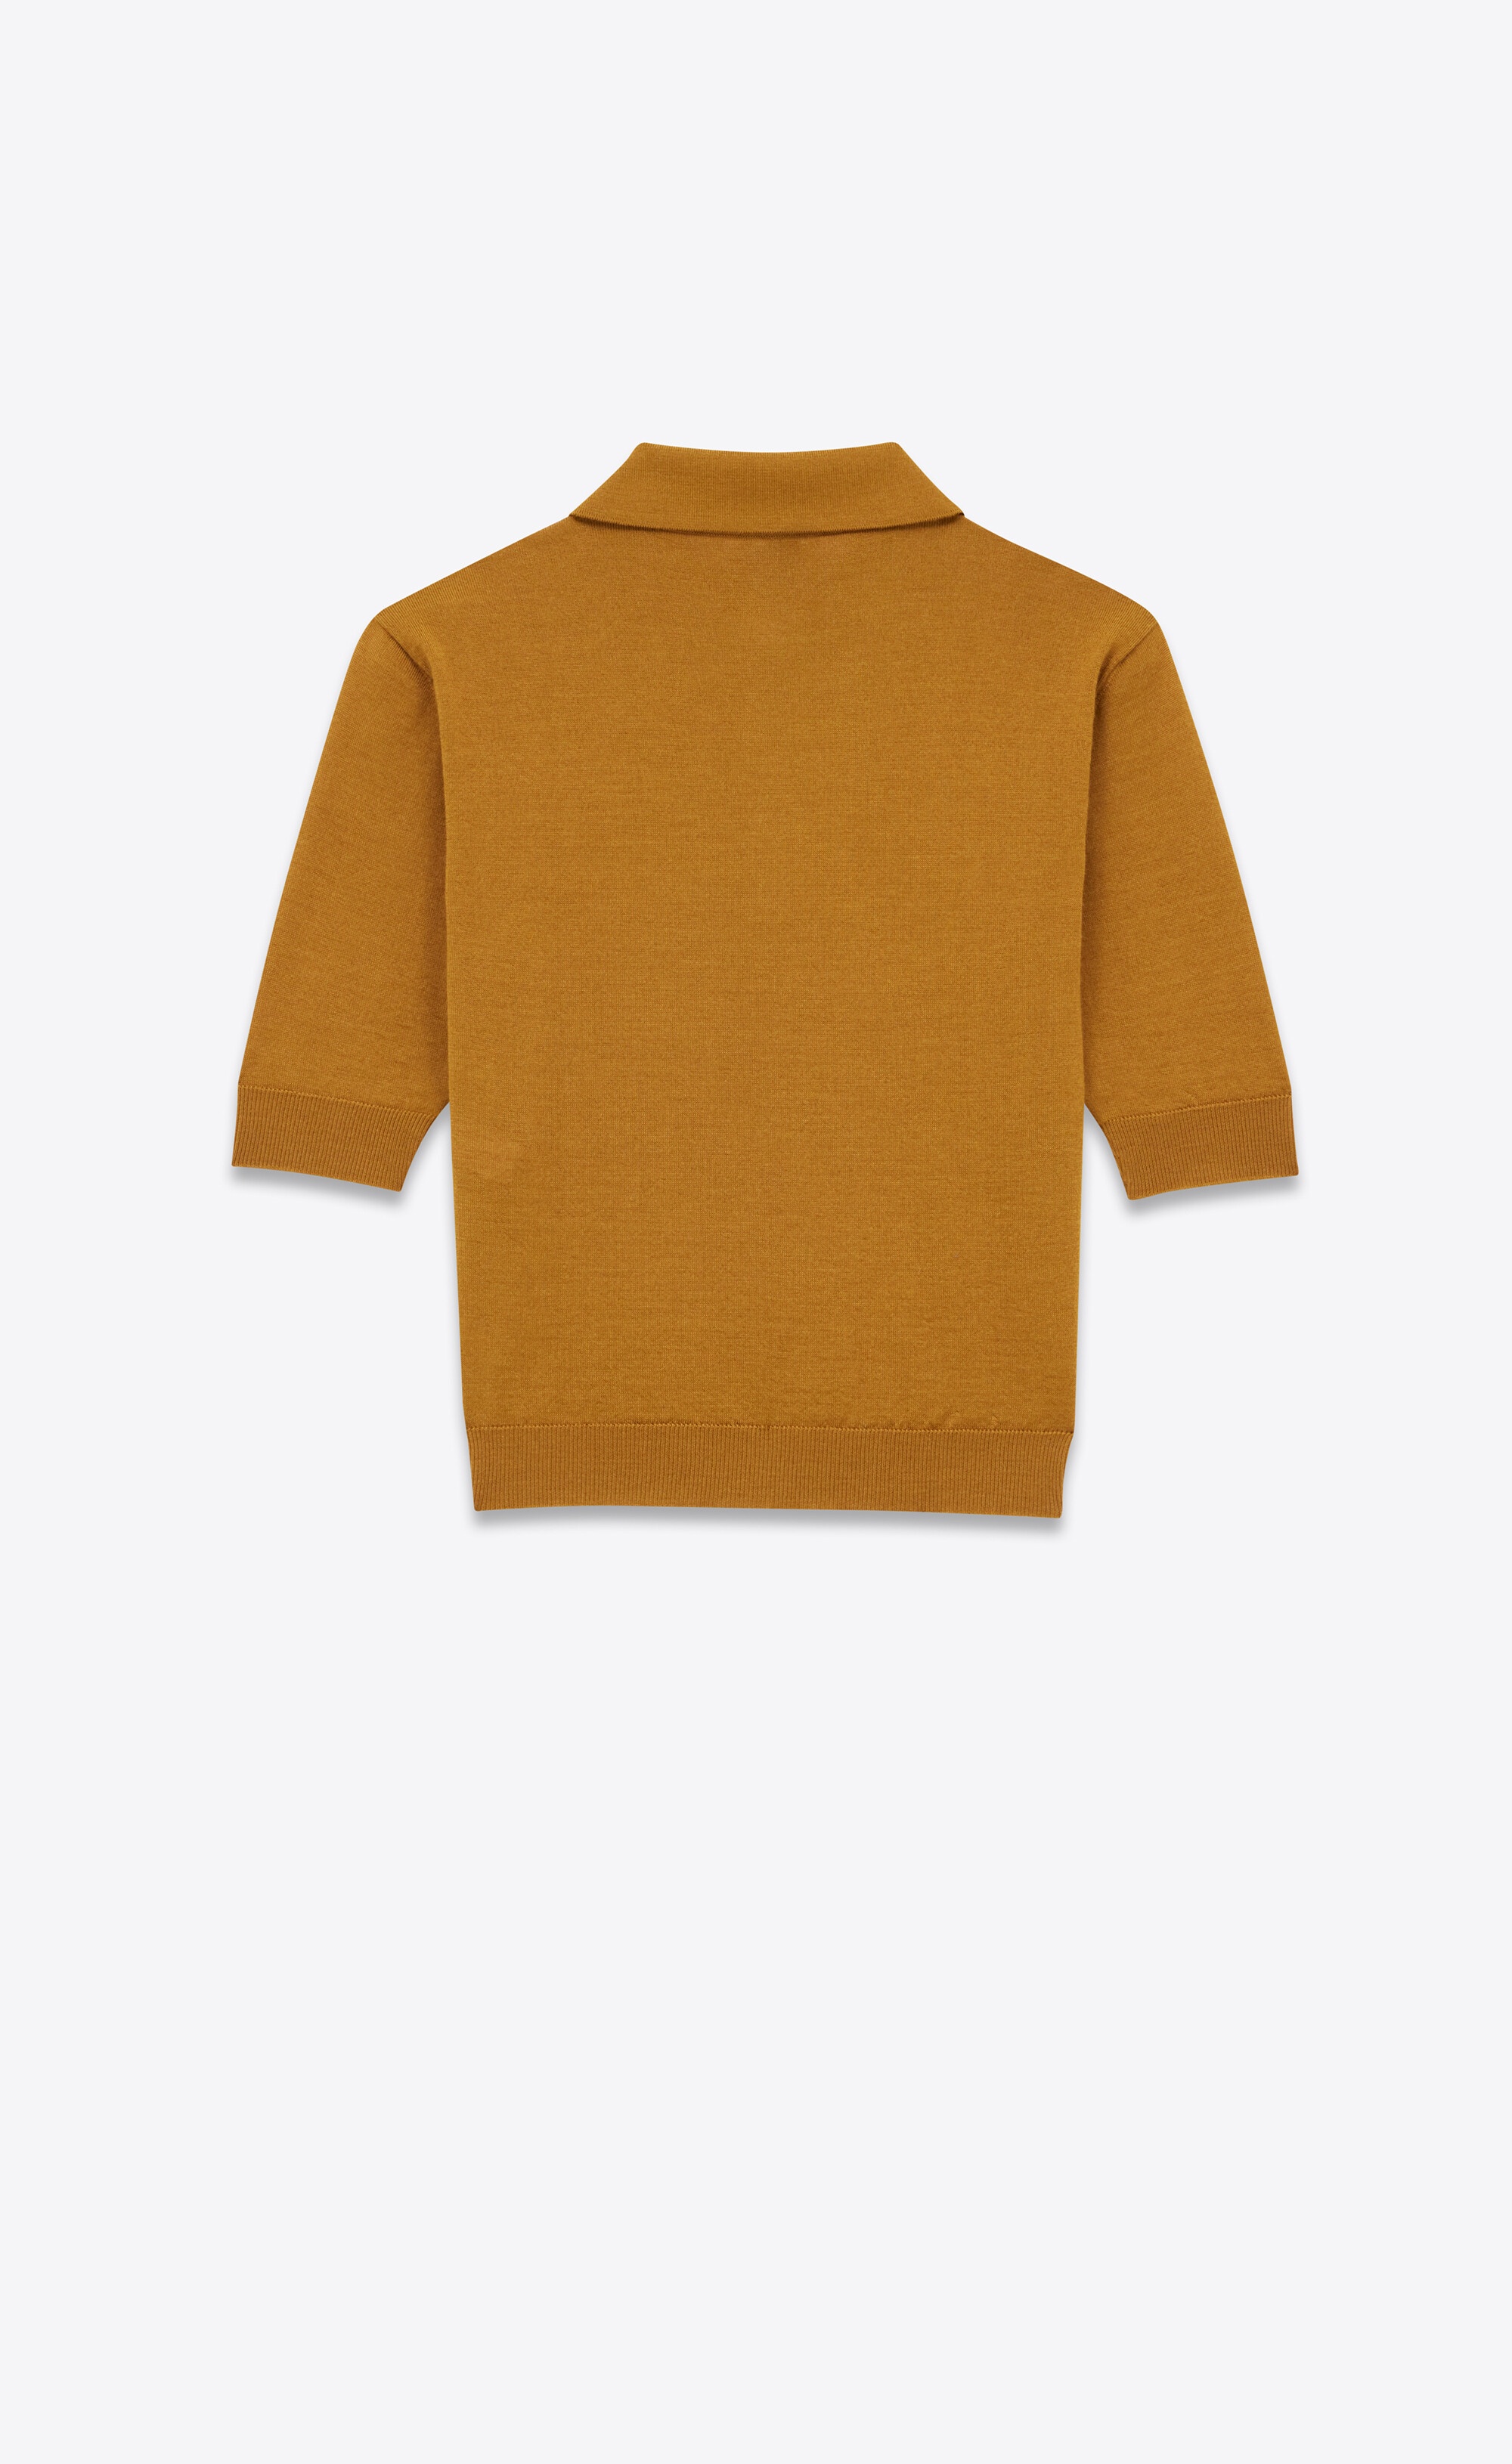 cassandre polo shirt in cashmere, wool, and silk - 2